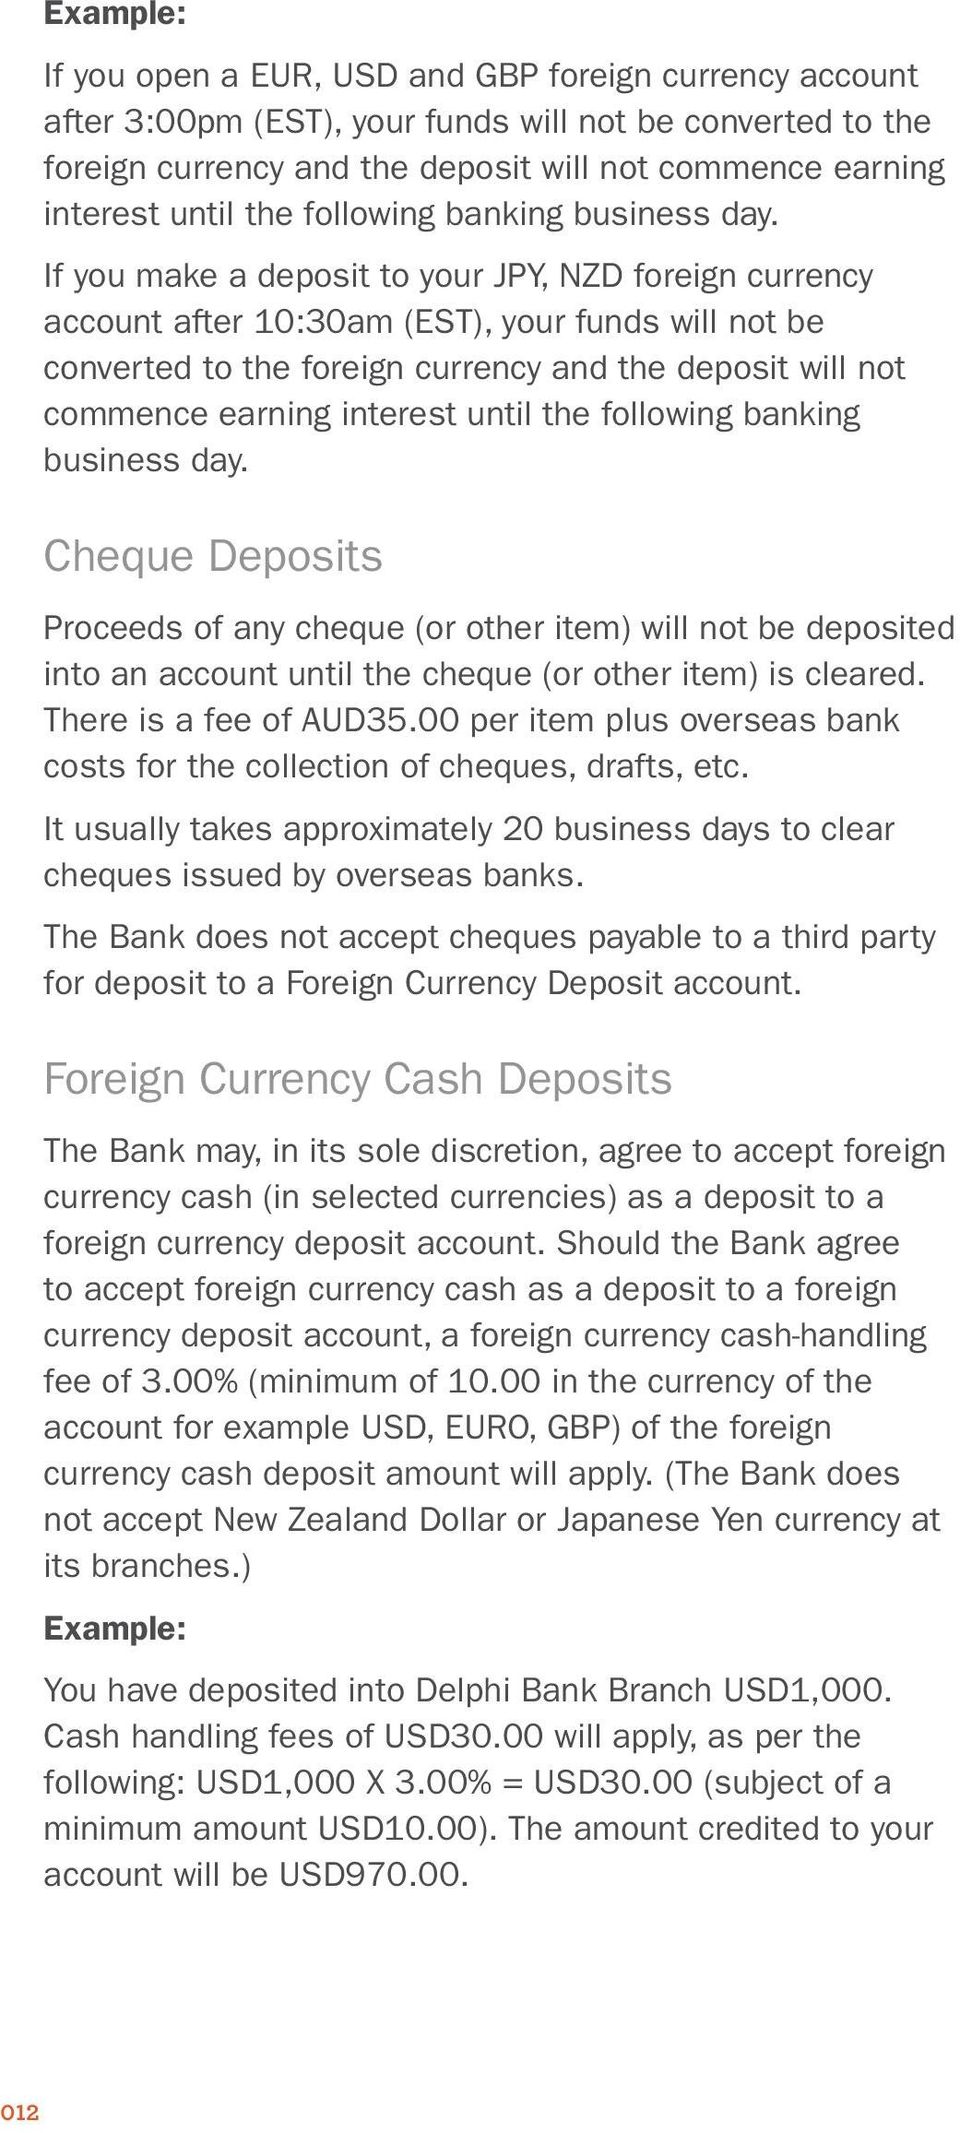 If you make a deposit to your JPY, NZD foreign currency account after 10:30am (EST), your funds will not be converted to the foreign currency and the deposit will not commence earning interest until 